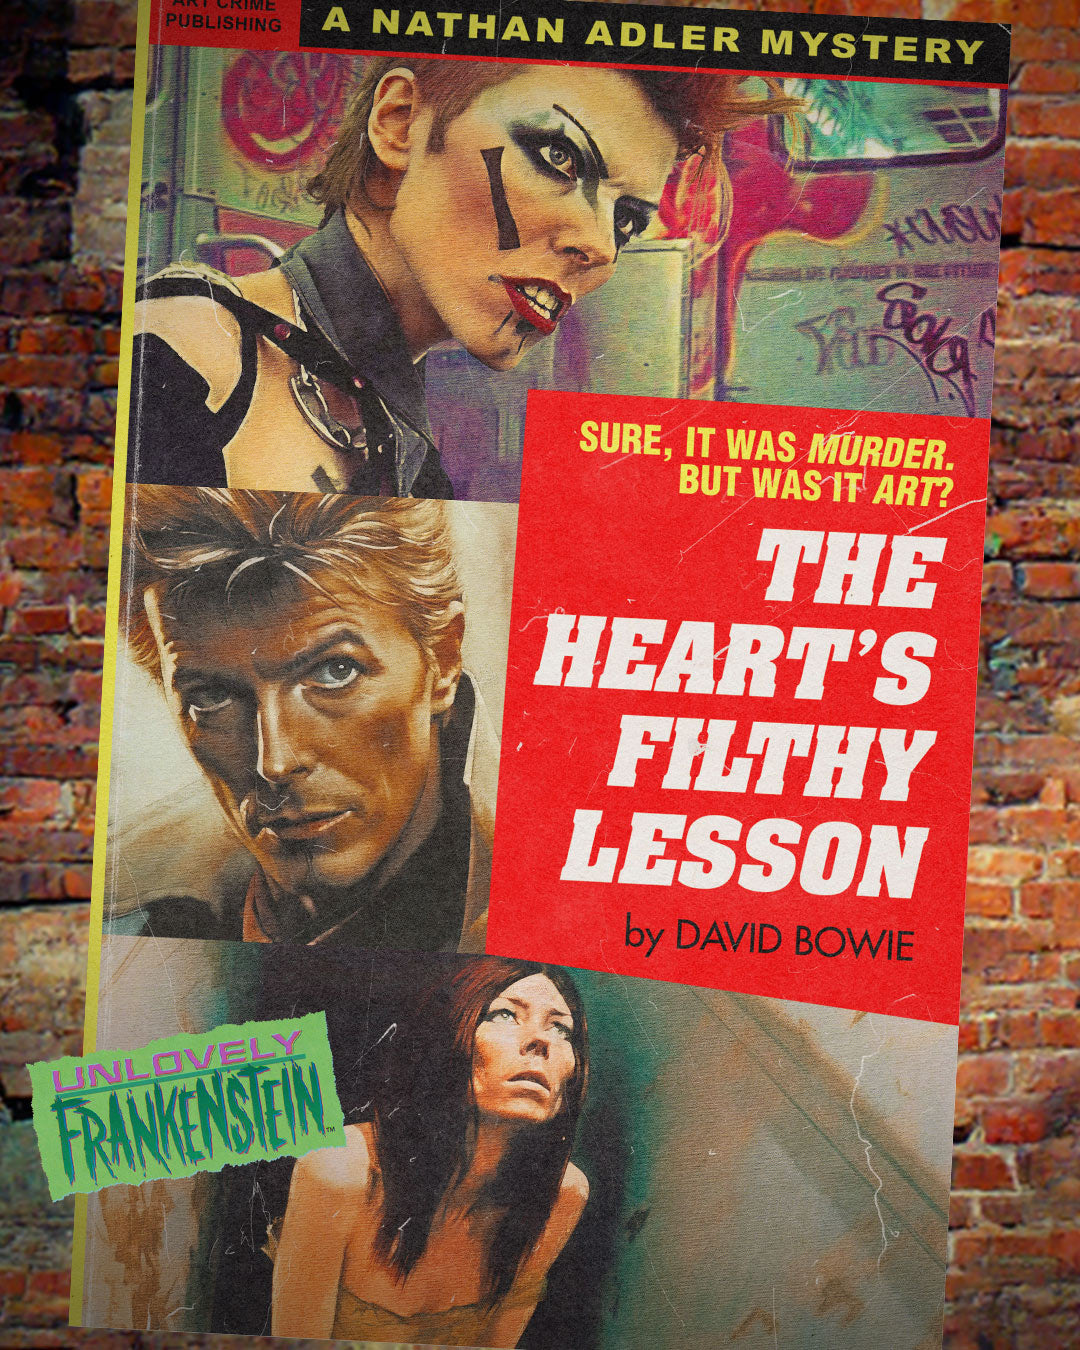 The Heart's Filthy Lesson: Bowie's Outside as a pulp paperback | 11x17 Art Print